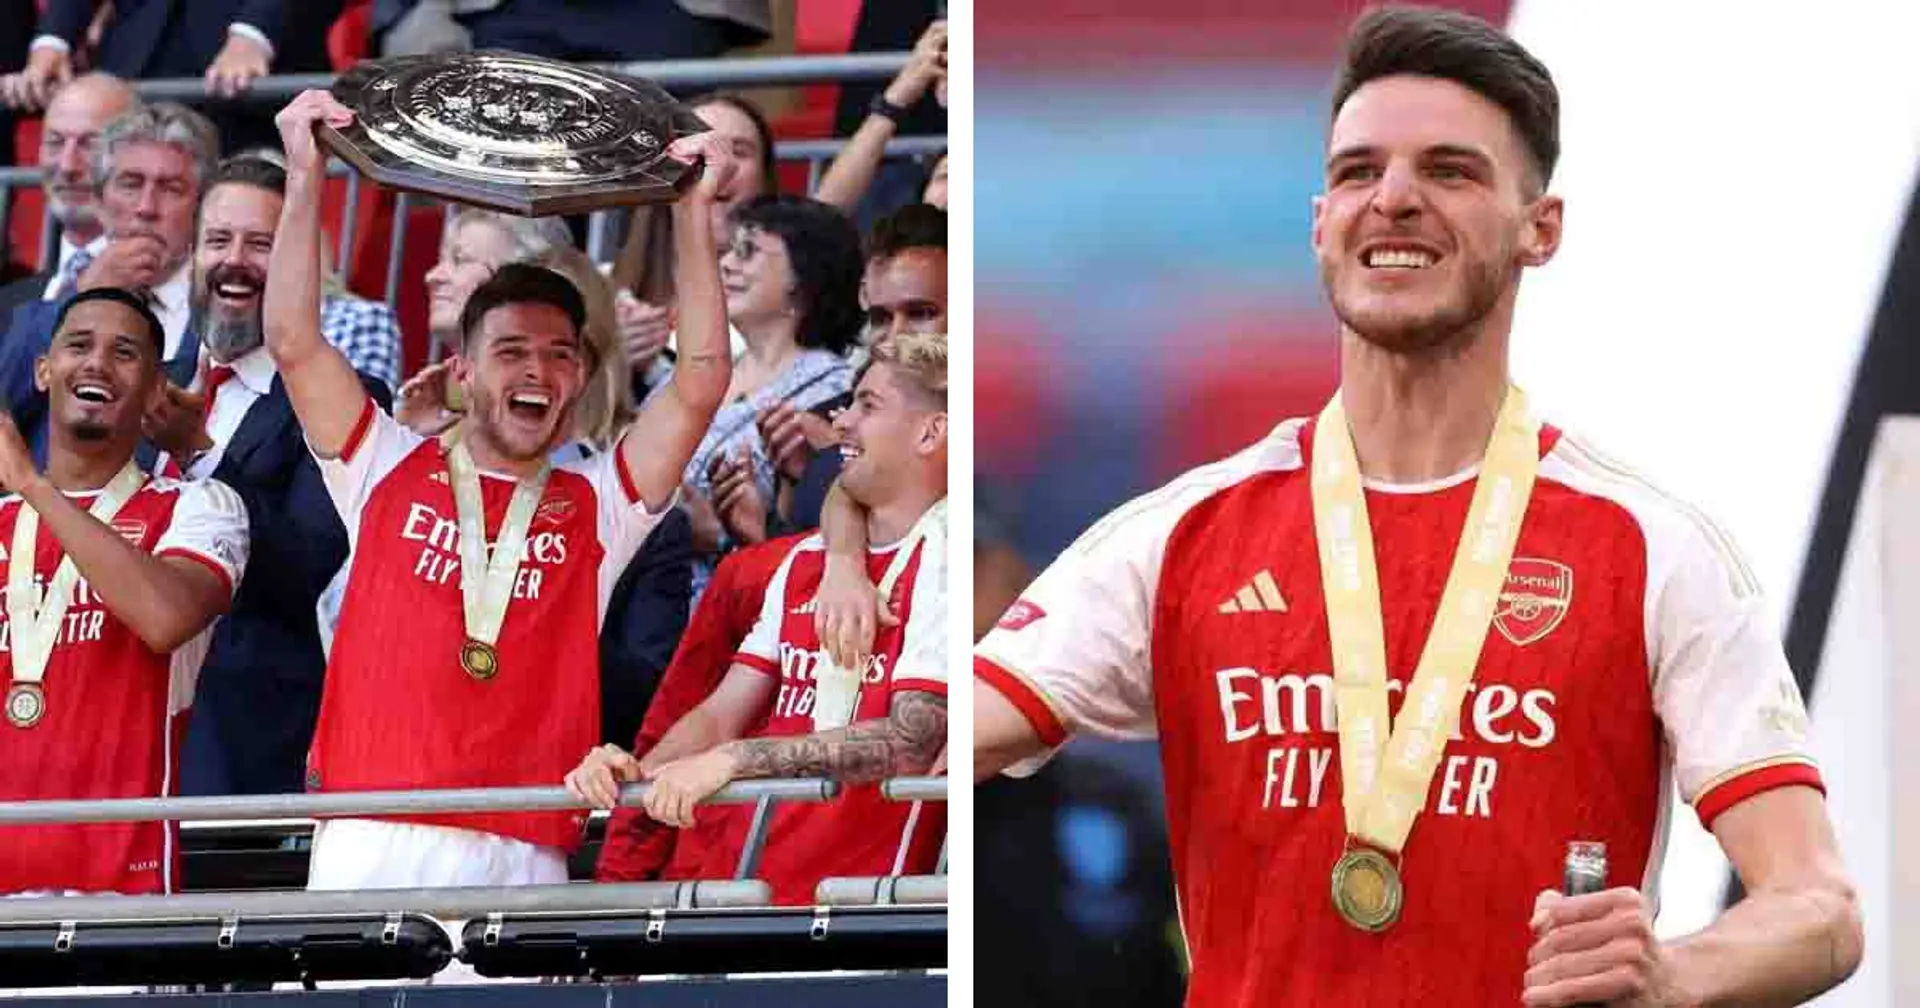 'This is what I envisioned': Rice reflects on winning first trophy with Arsenal